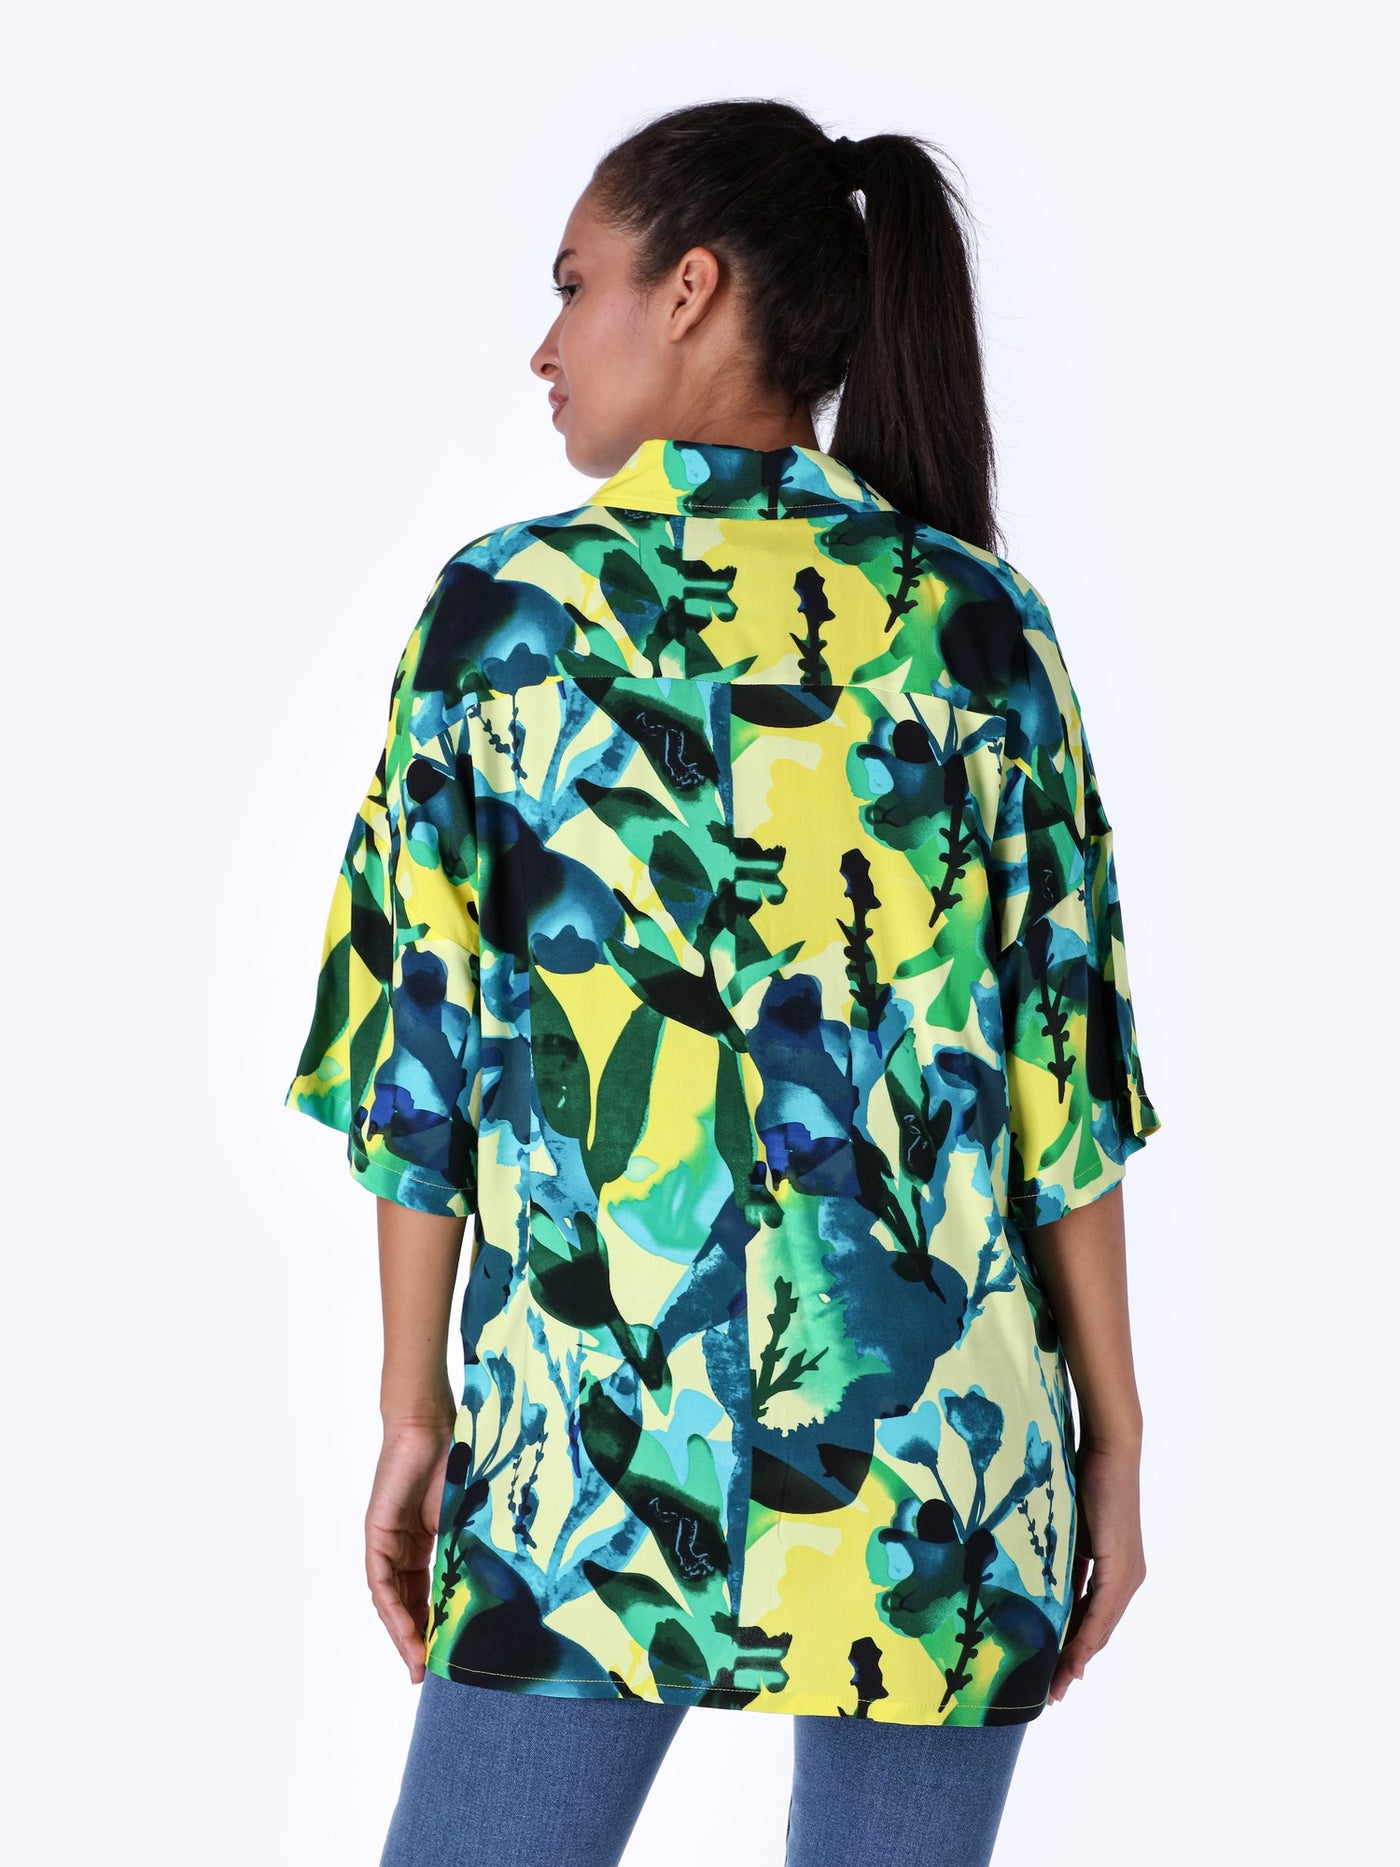 OR Women's Oversized Boxy Floral Shirt